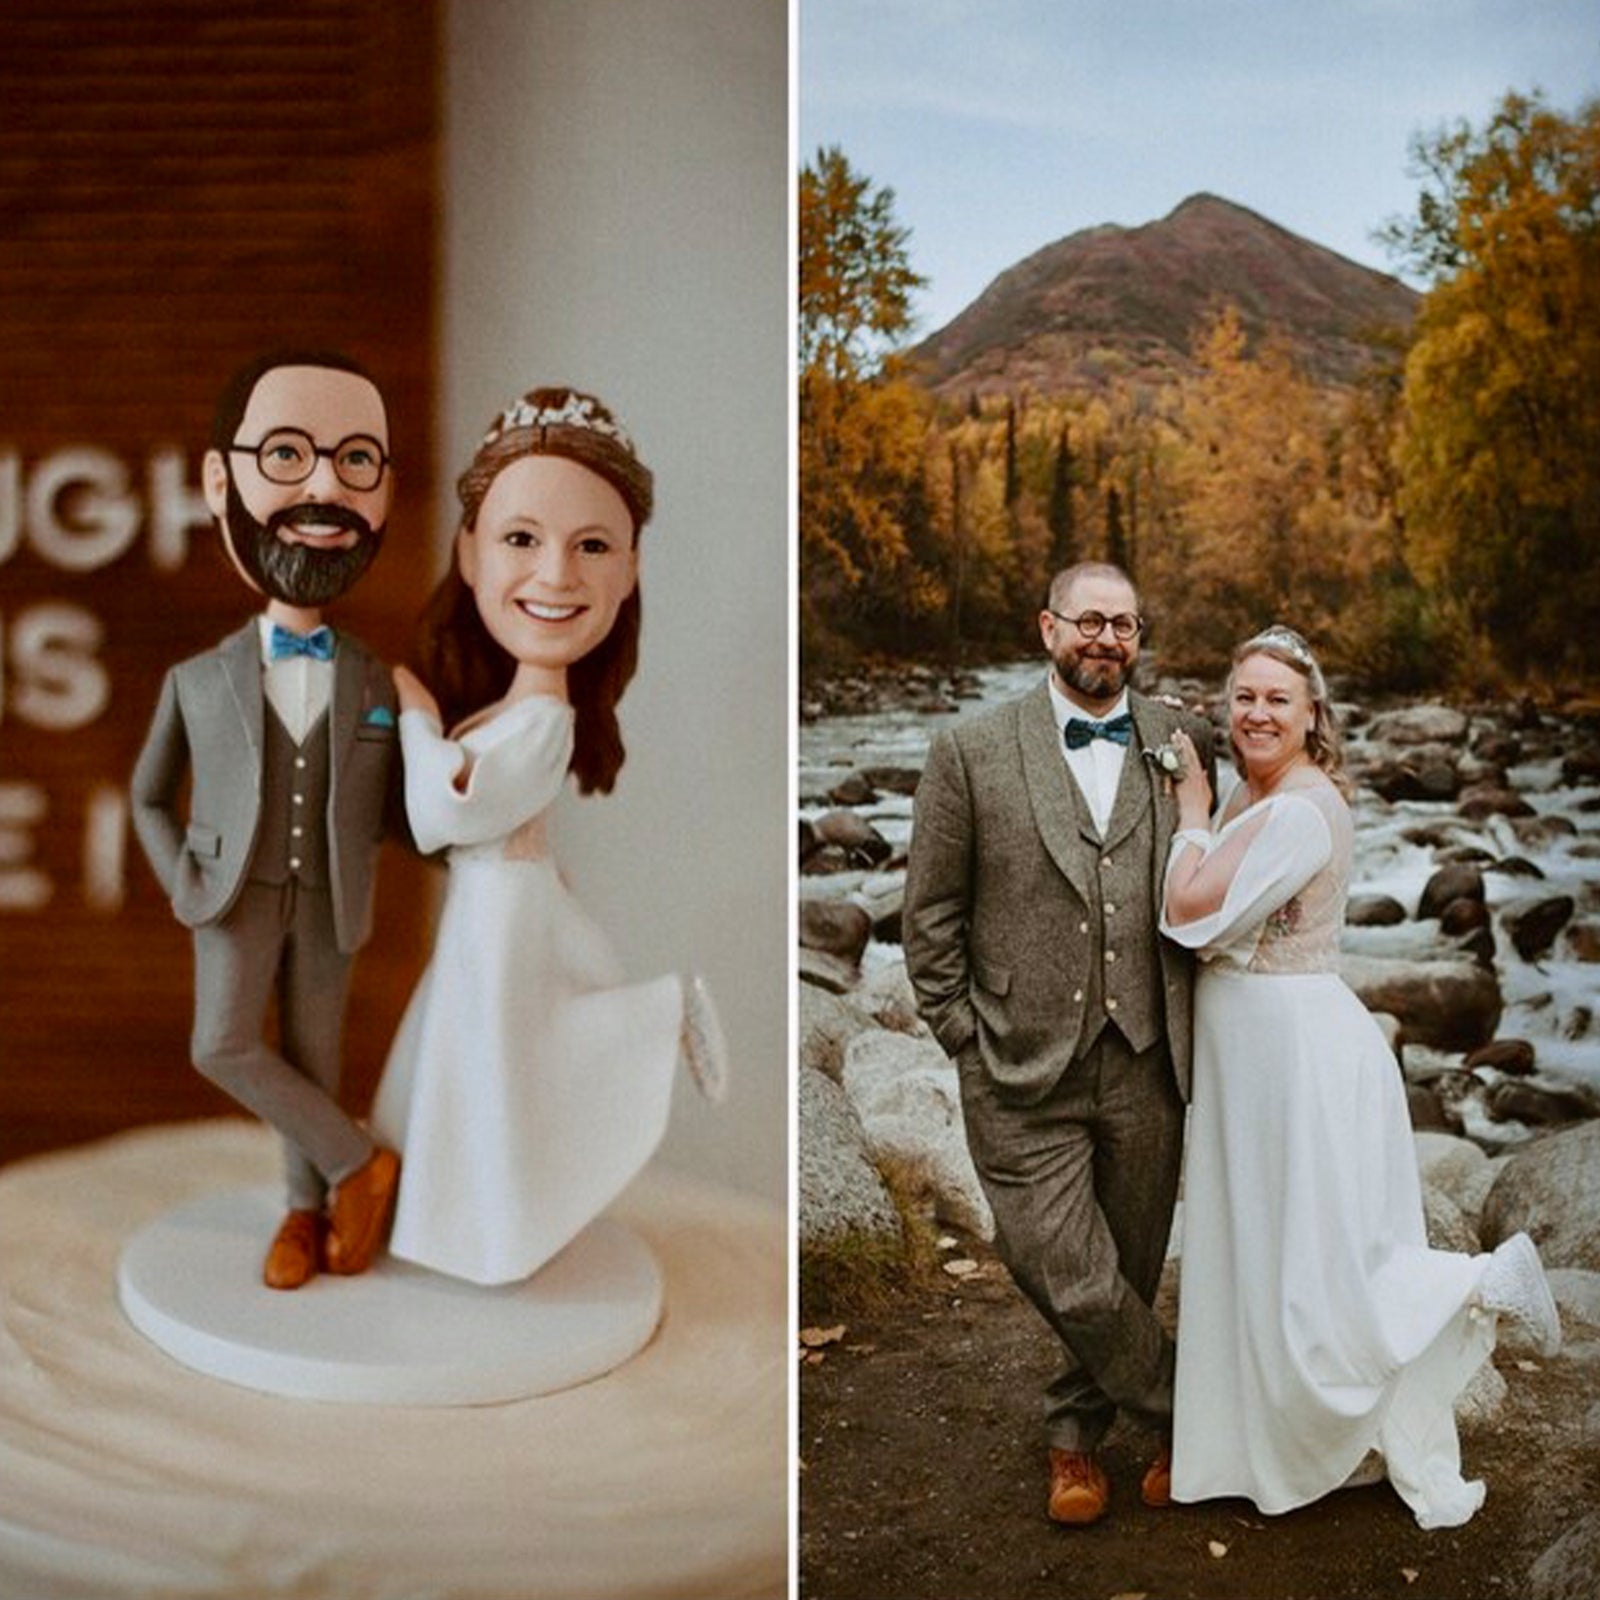 Why should I buy a custom bobble head or cake topper for my wedding